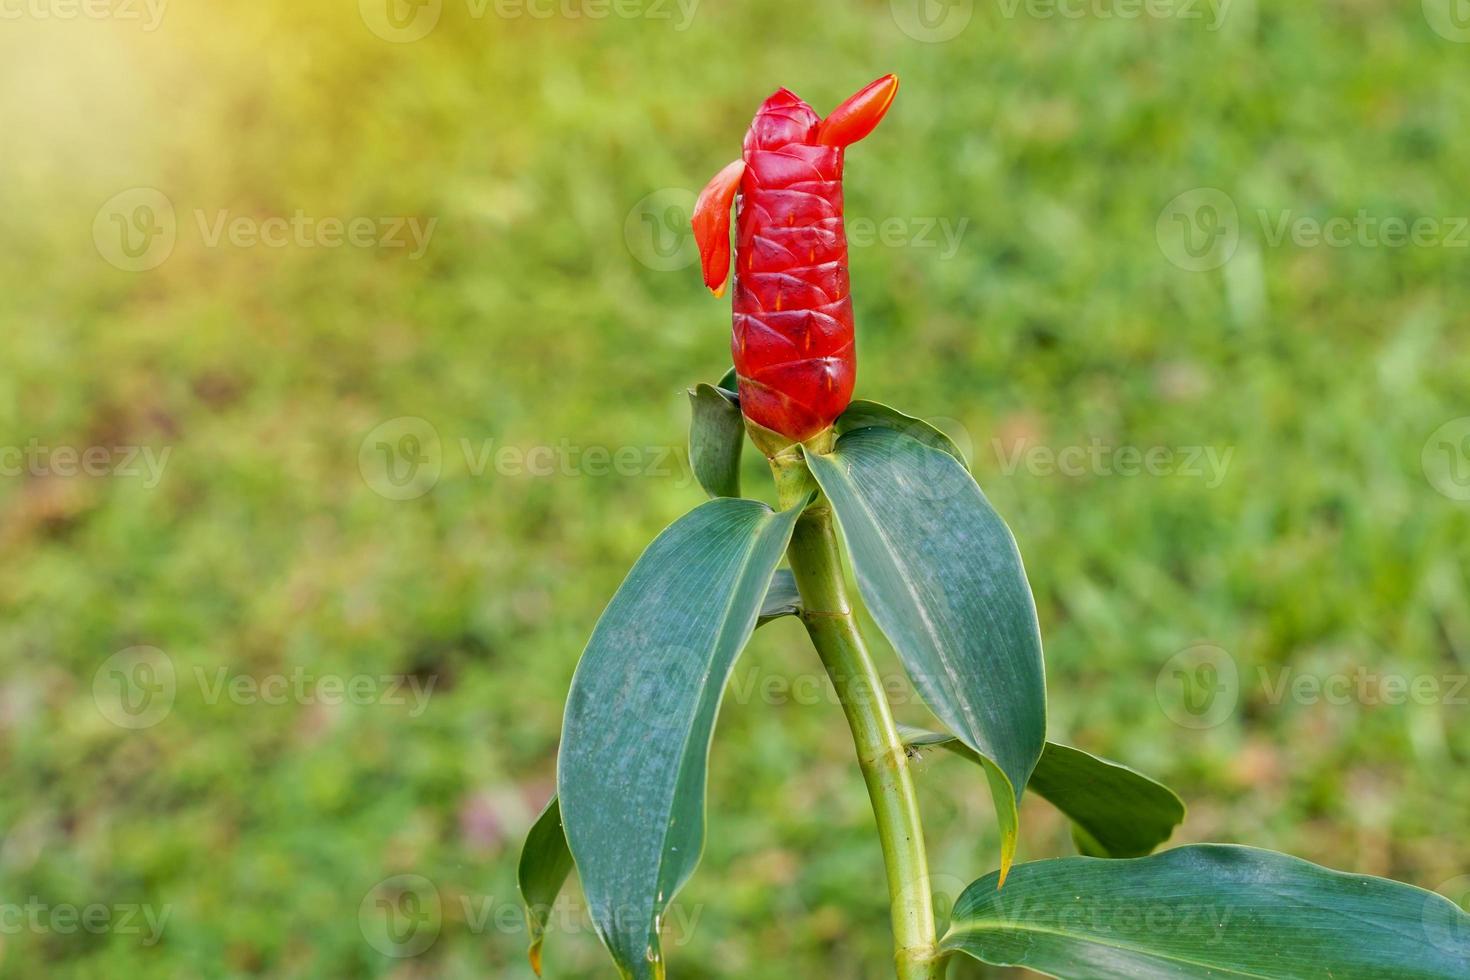 Costus woodsonii, Costus speciosus is a herbaceous plant. There is a rhizome underground, often in clumps, with red flowers similar to ginger flowers. photo